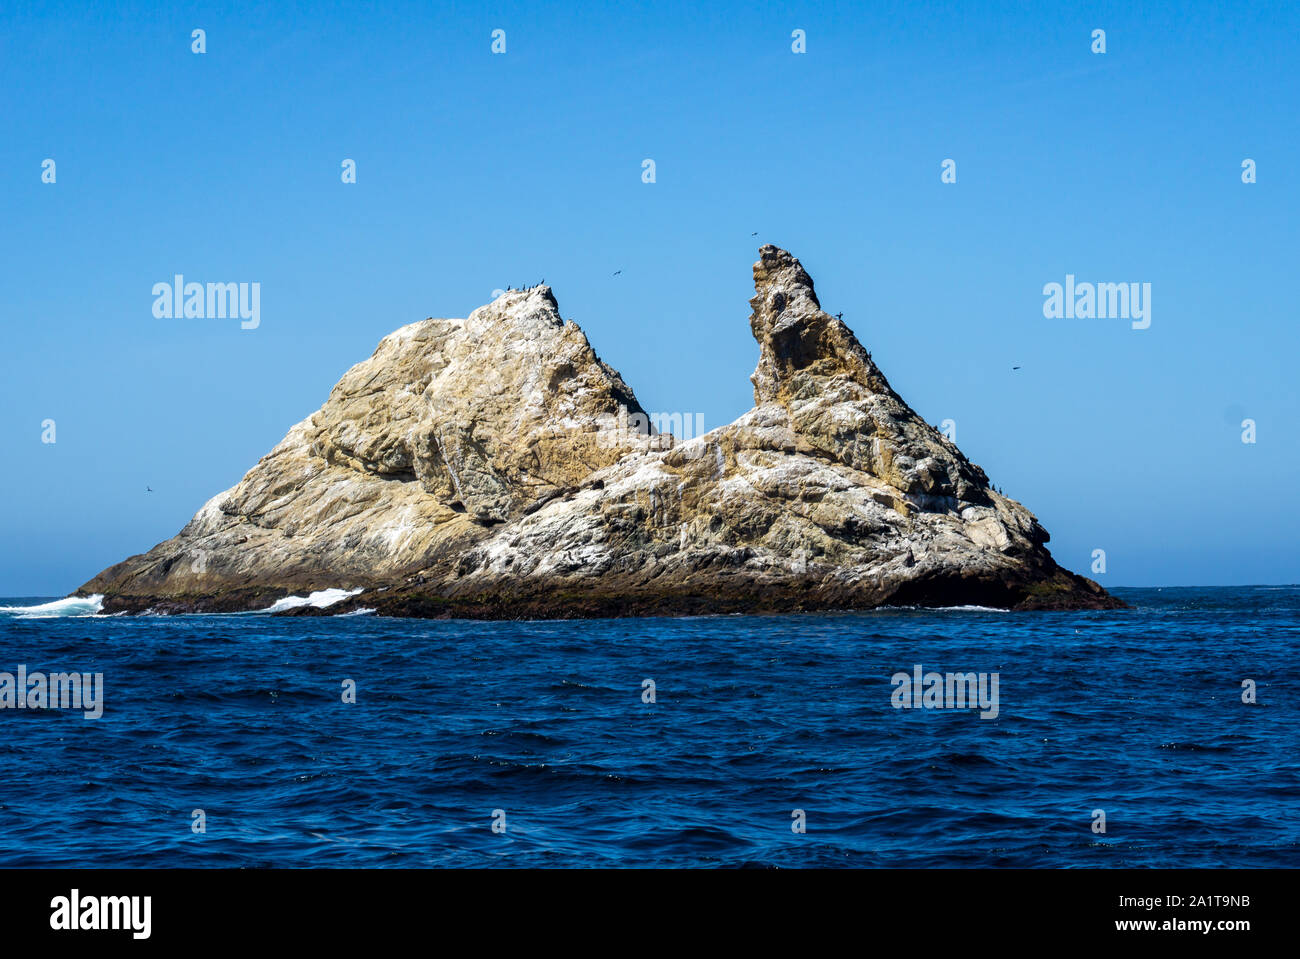 White and yellow rock sticking out of the wild and wavy ocean like a devil's tooth at the Farallon islands, shaped like a monster. Stock Photo